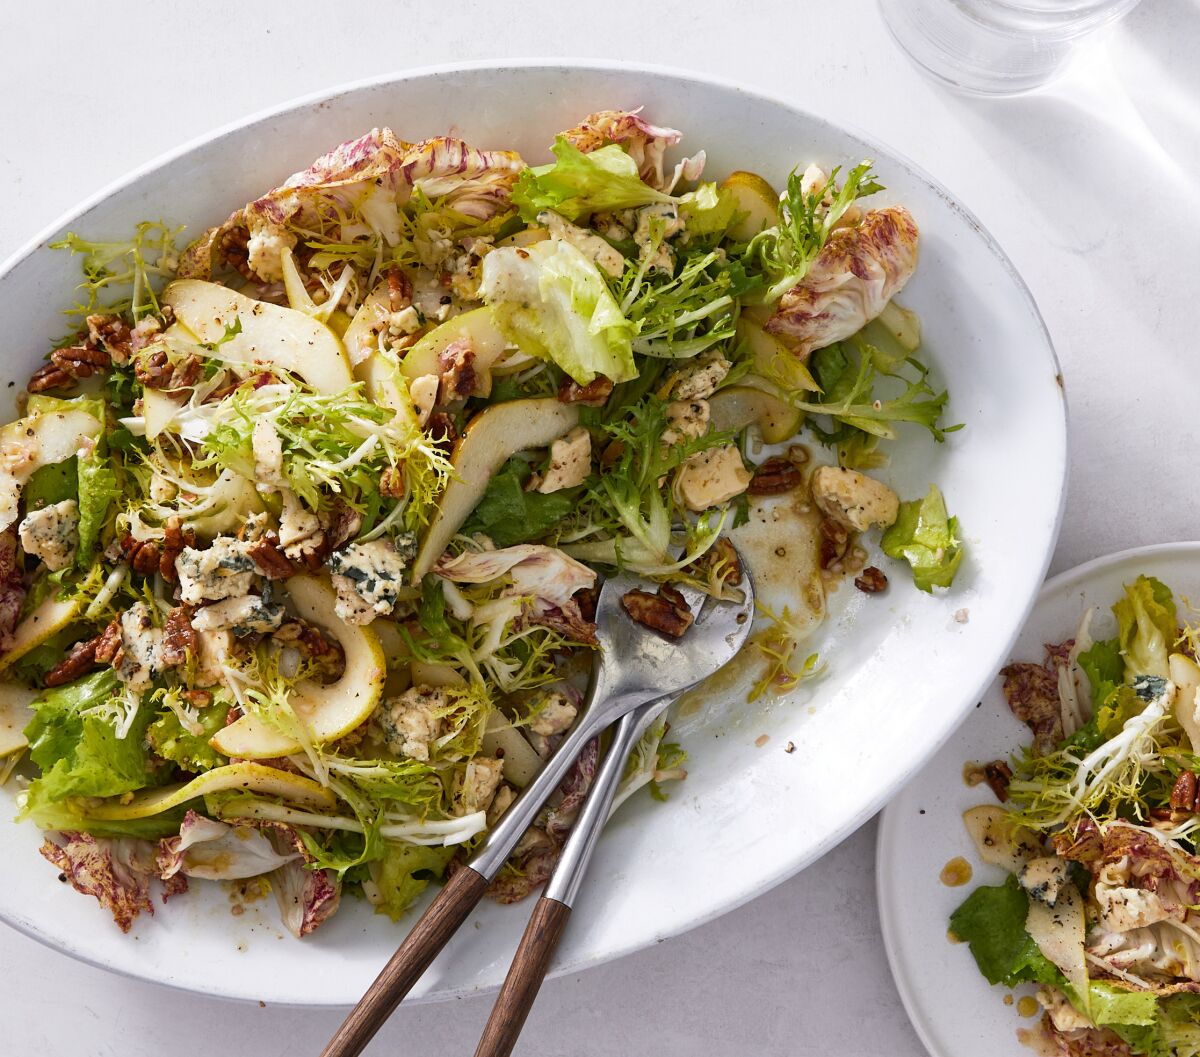 A crisp salad of chicories, frisee and radicchio with blue cheese, pears and pecans.